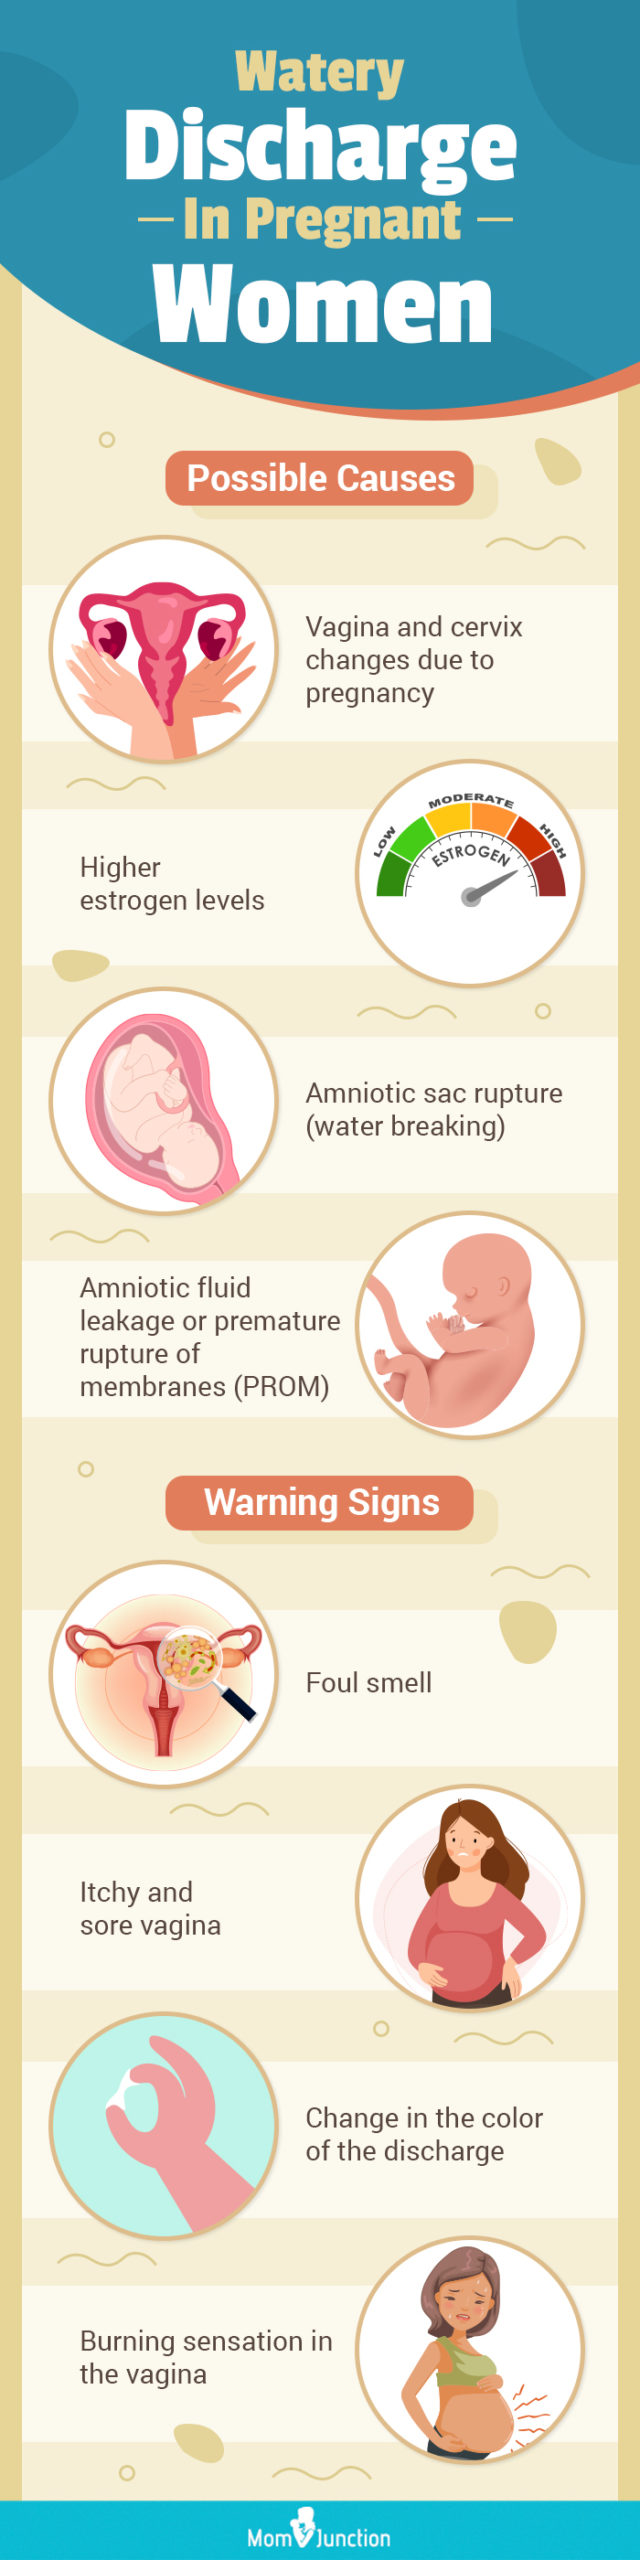 https://www.momjunction.com/wp-content/uploads/2023/04/Watery-Discharge-In-Pregnant-Women-scaled.jpg